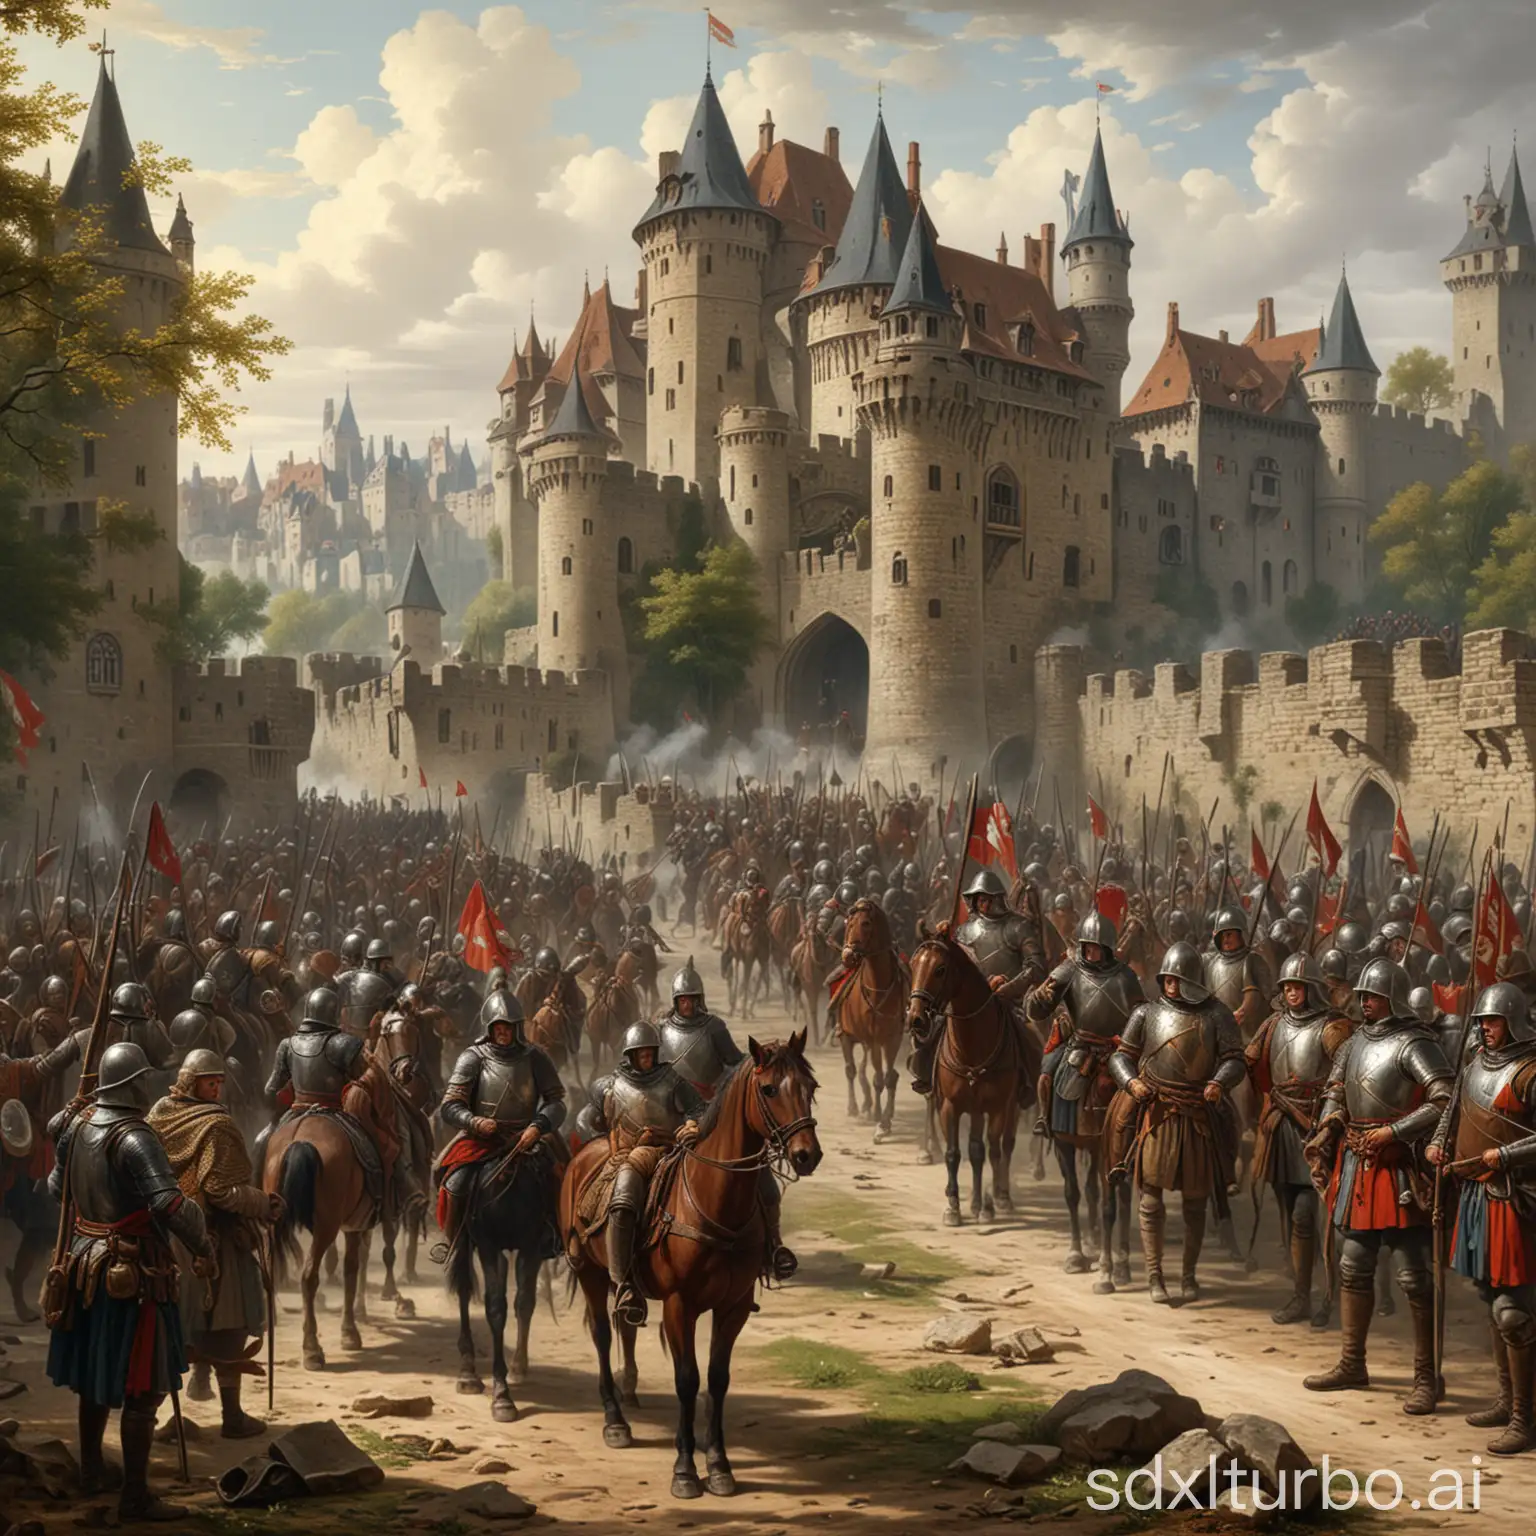 Middle Ages, year 1650. Troops with soldiers in front of the castle withdraw 